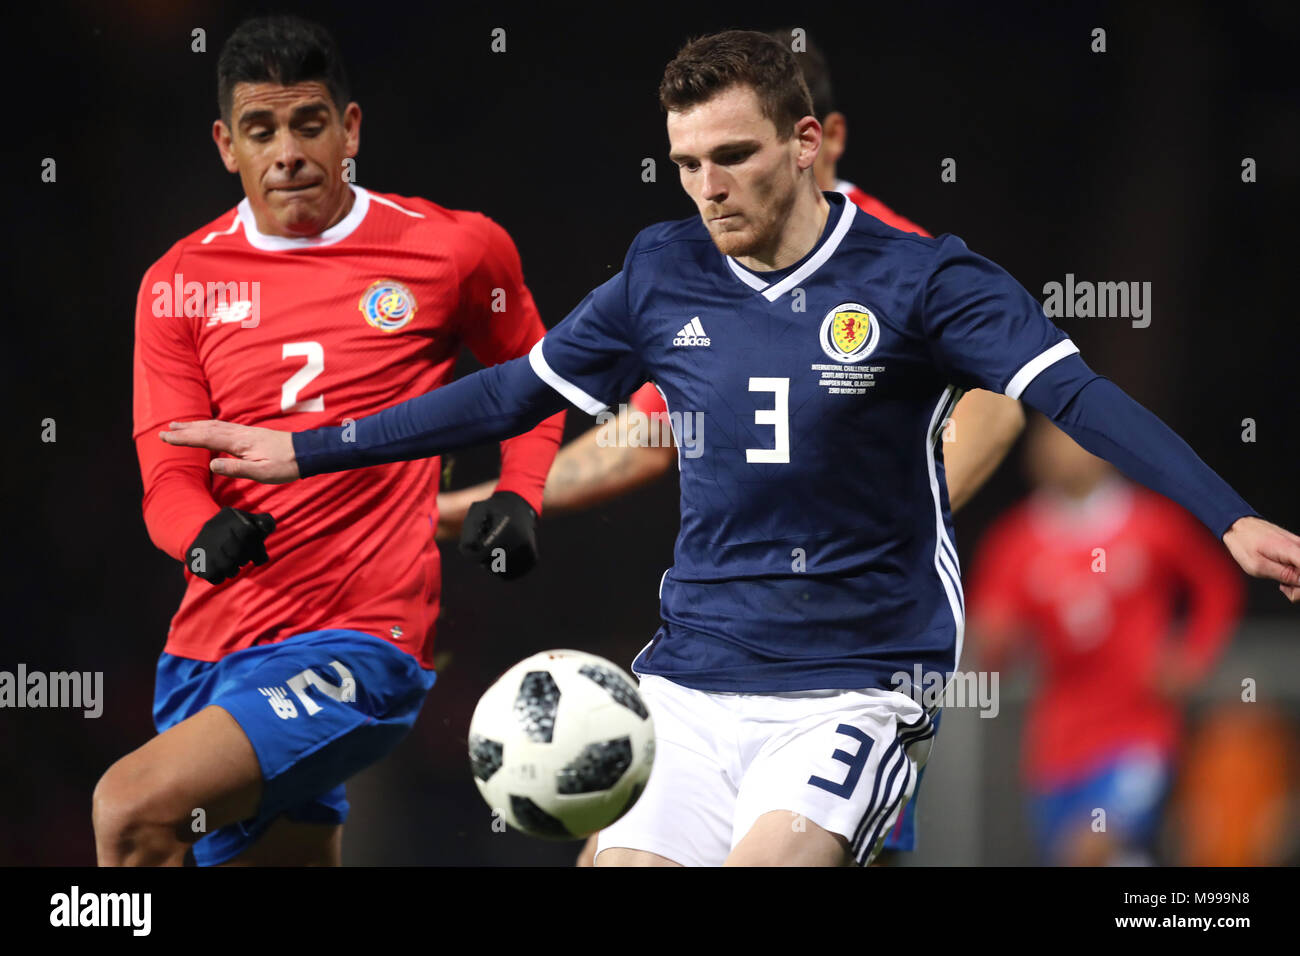 Scotland's Andrew Robertson (right) and Costa Rica's Johnny Acosta battle for the ball during the international friendly match at Hampden Park, Glasgow. Stock Photo